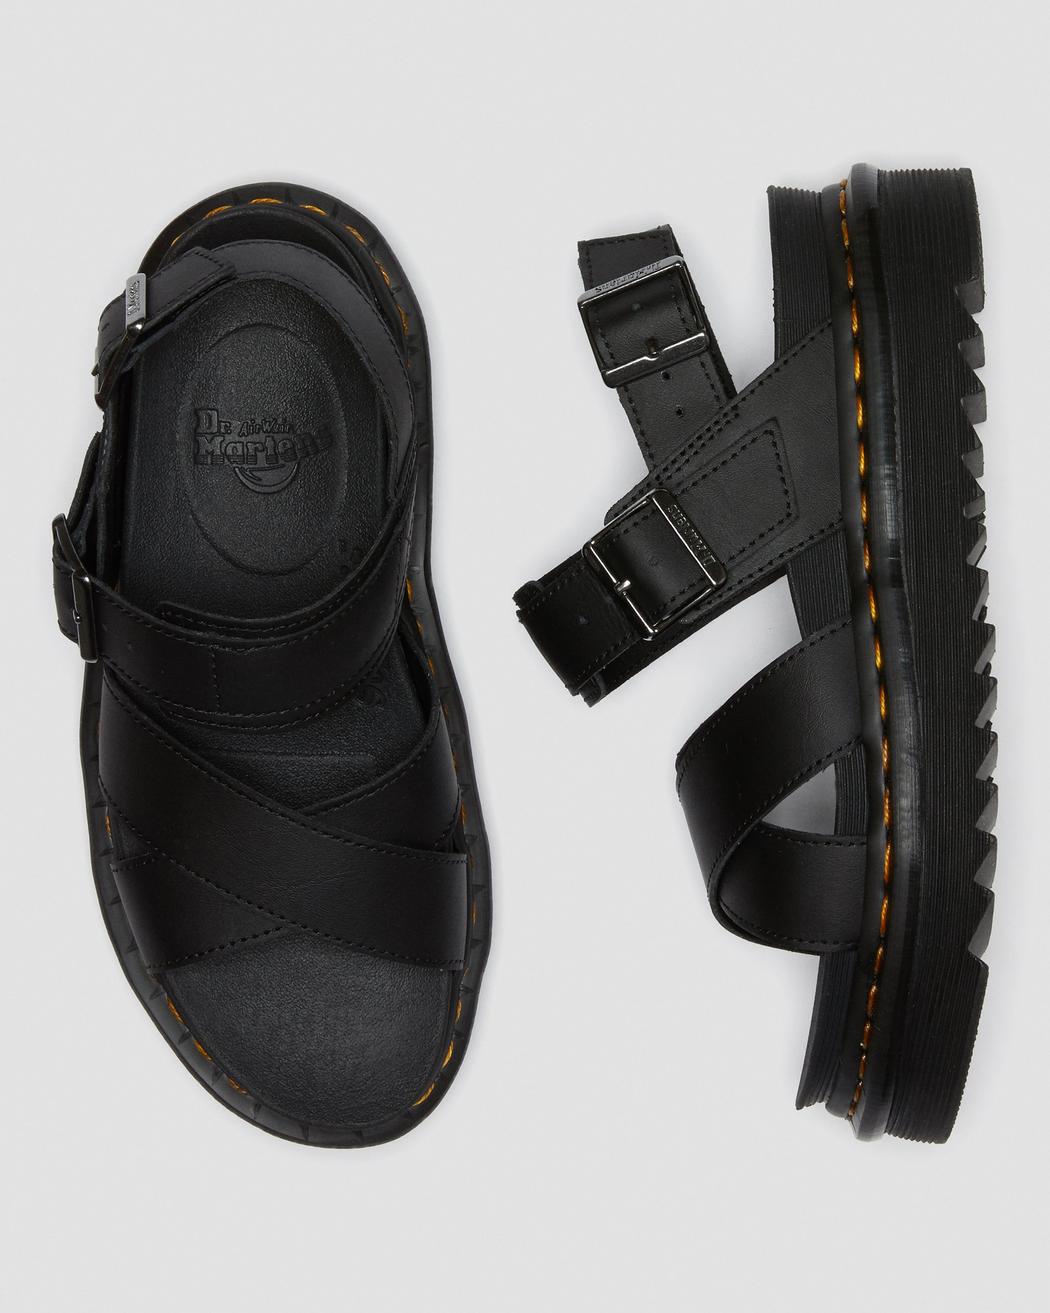 Dr. Martens Voss II Black Hydro Leather Sandals 26799001